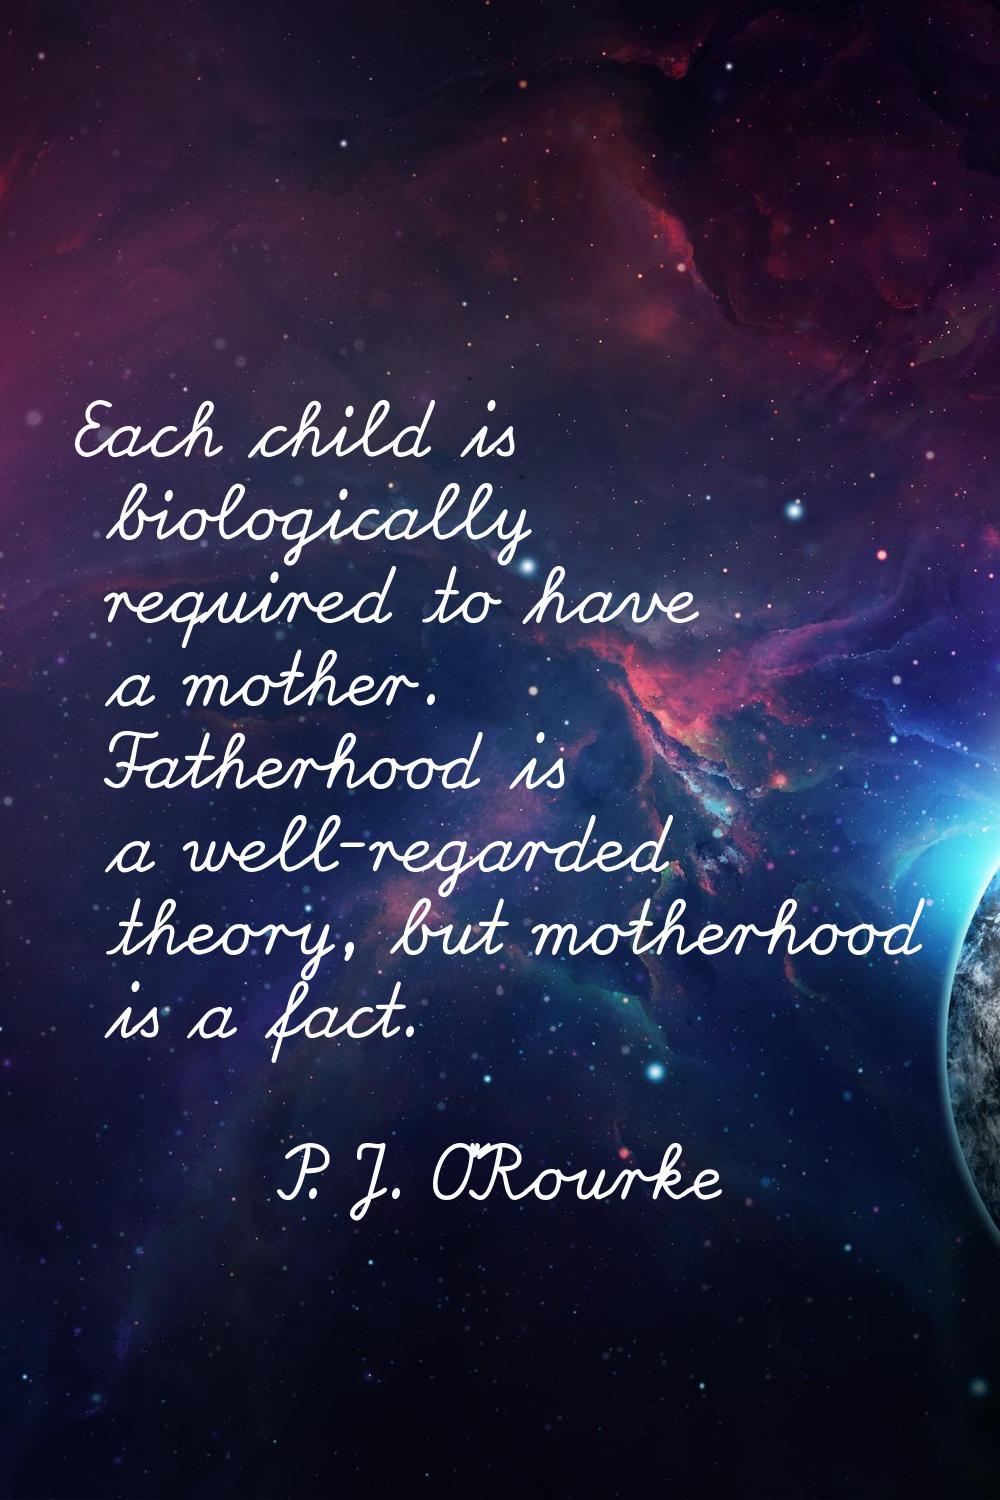 Each child is biologically required to have a mother. Fatherhood is a well-regarded theory, but mot